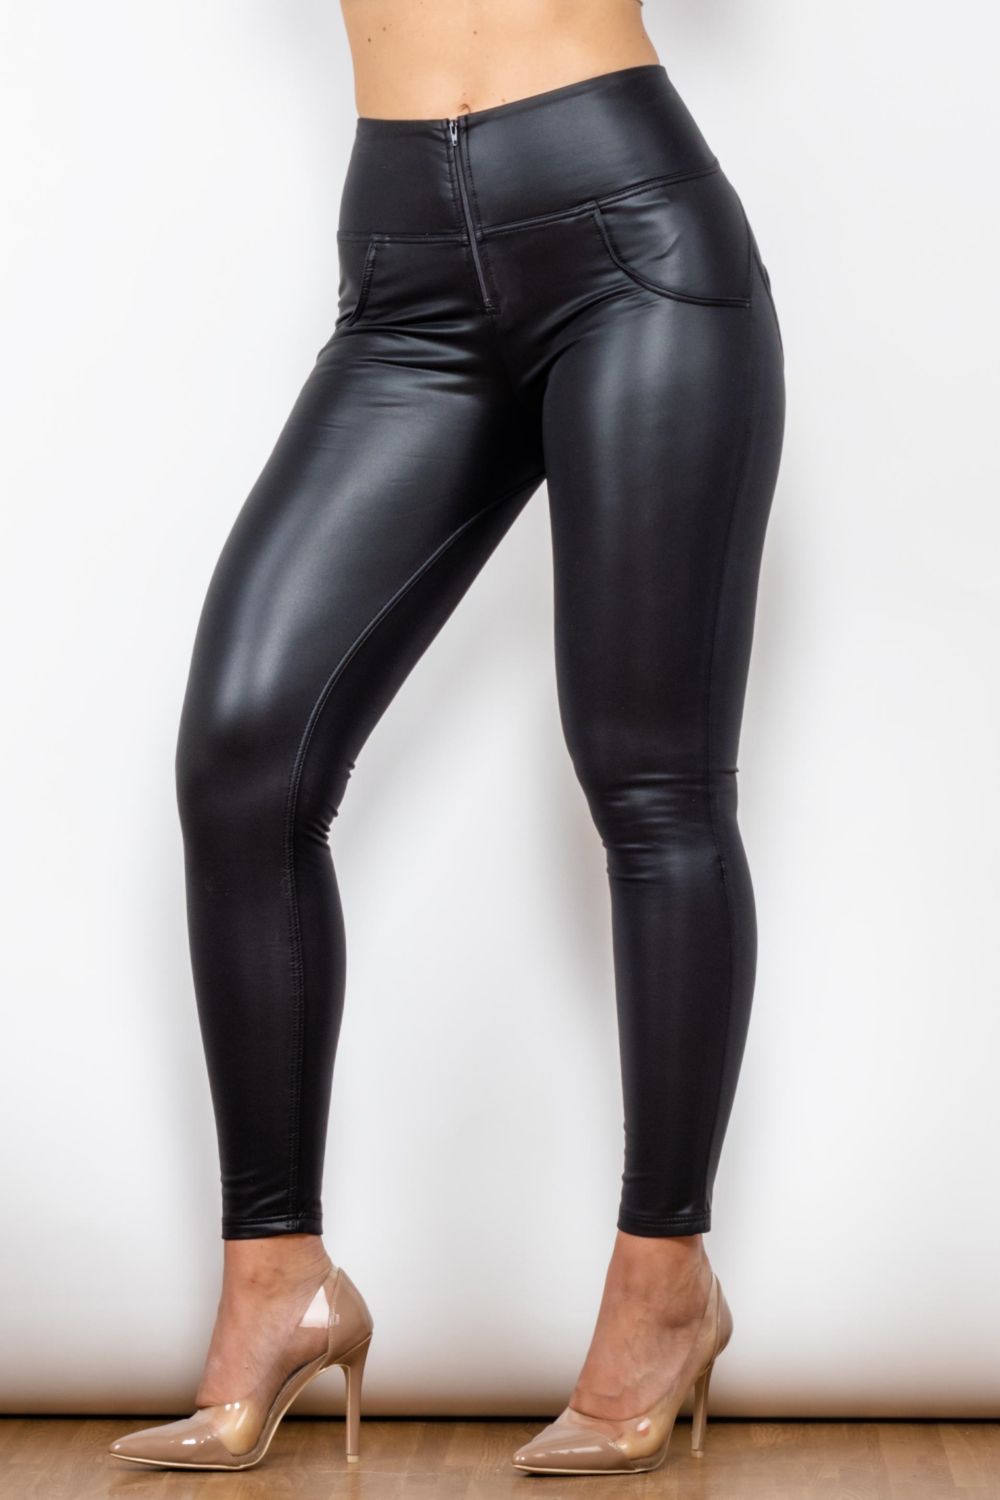 Shascullfites Black Faux Leather Zipper Crop Top Lifting Leather Pants Set